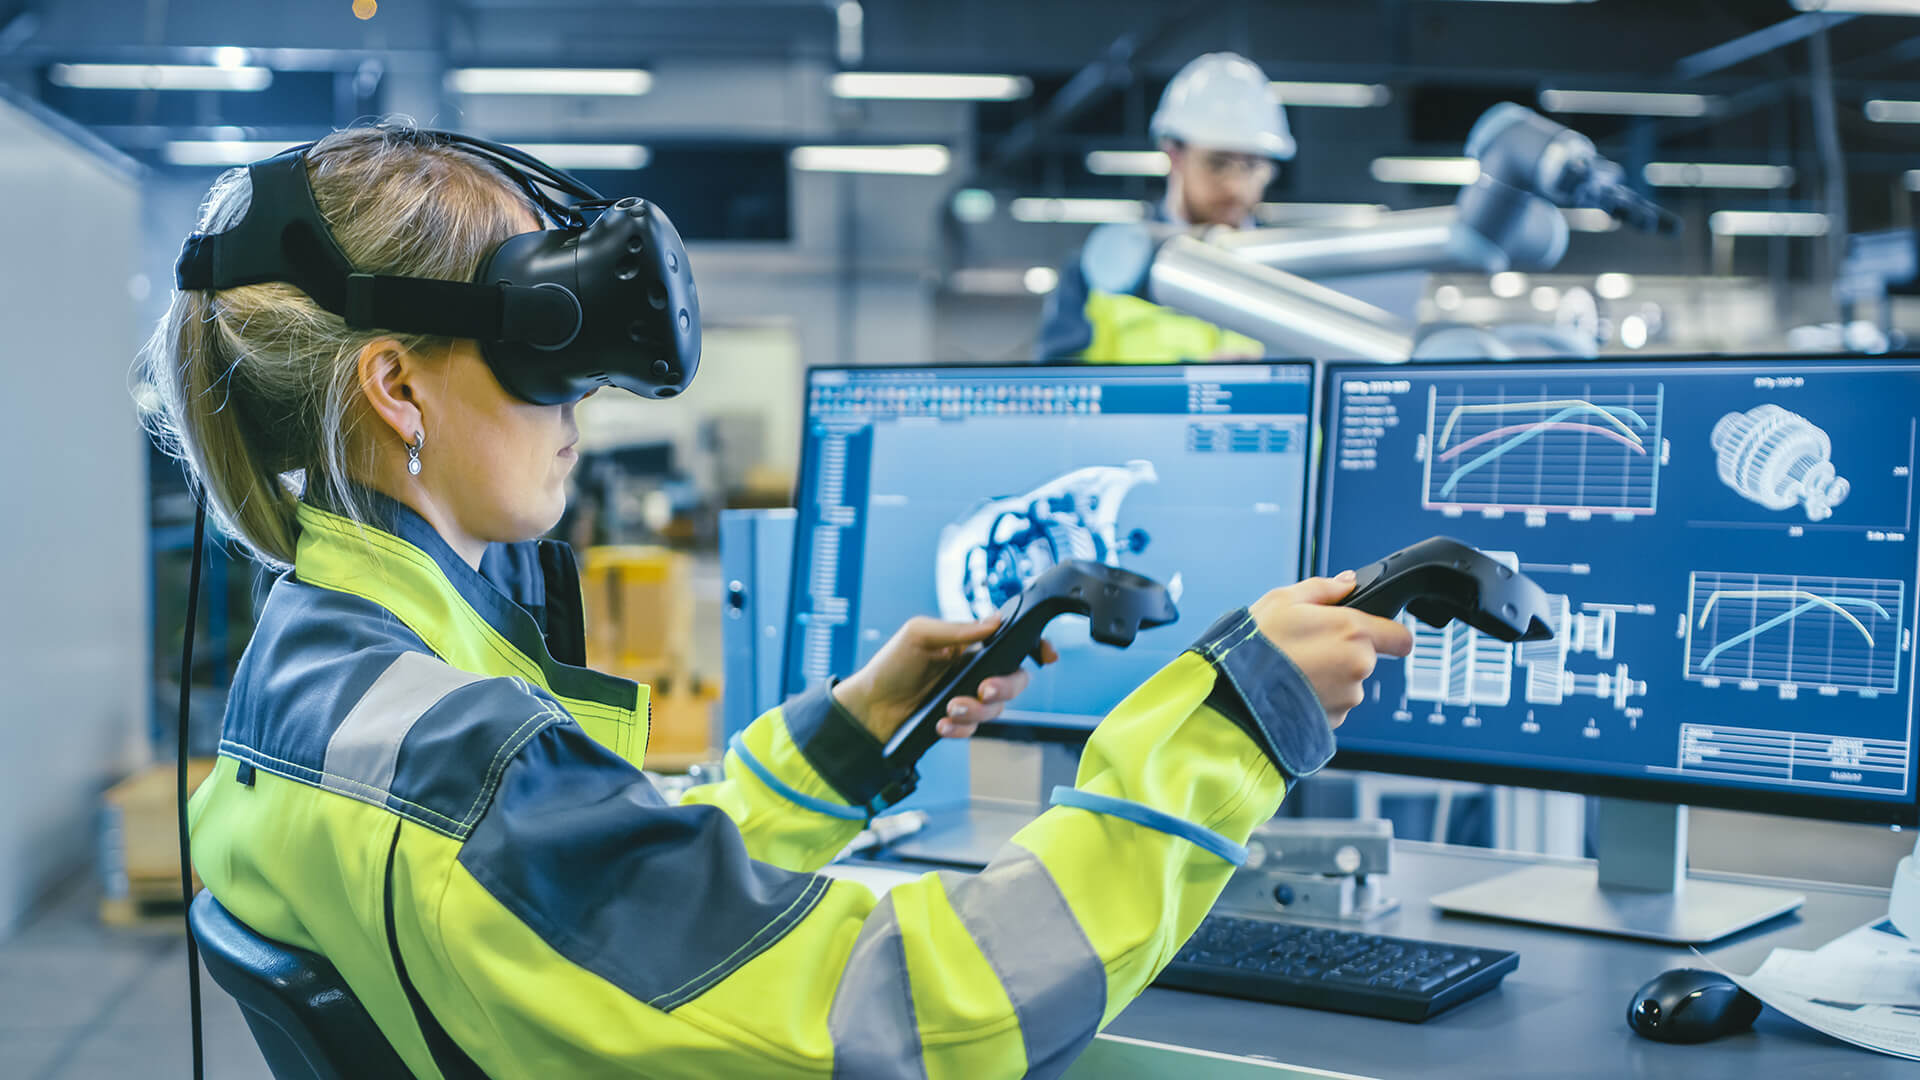 How To Determine The Return On Investment For Virtual Reality Training Software